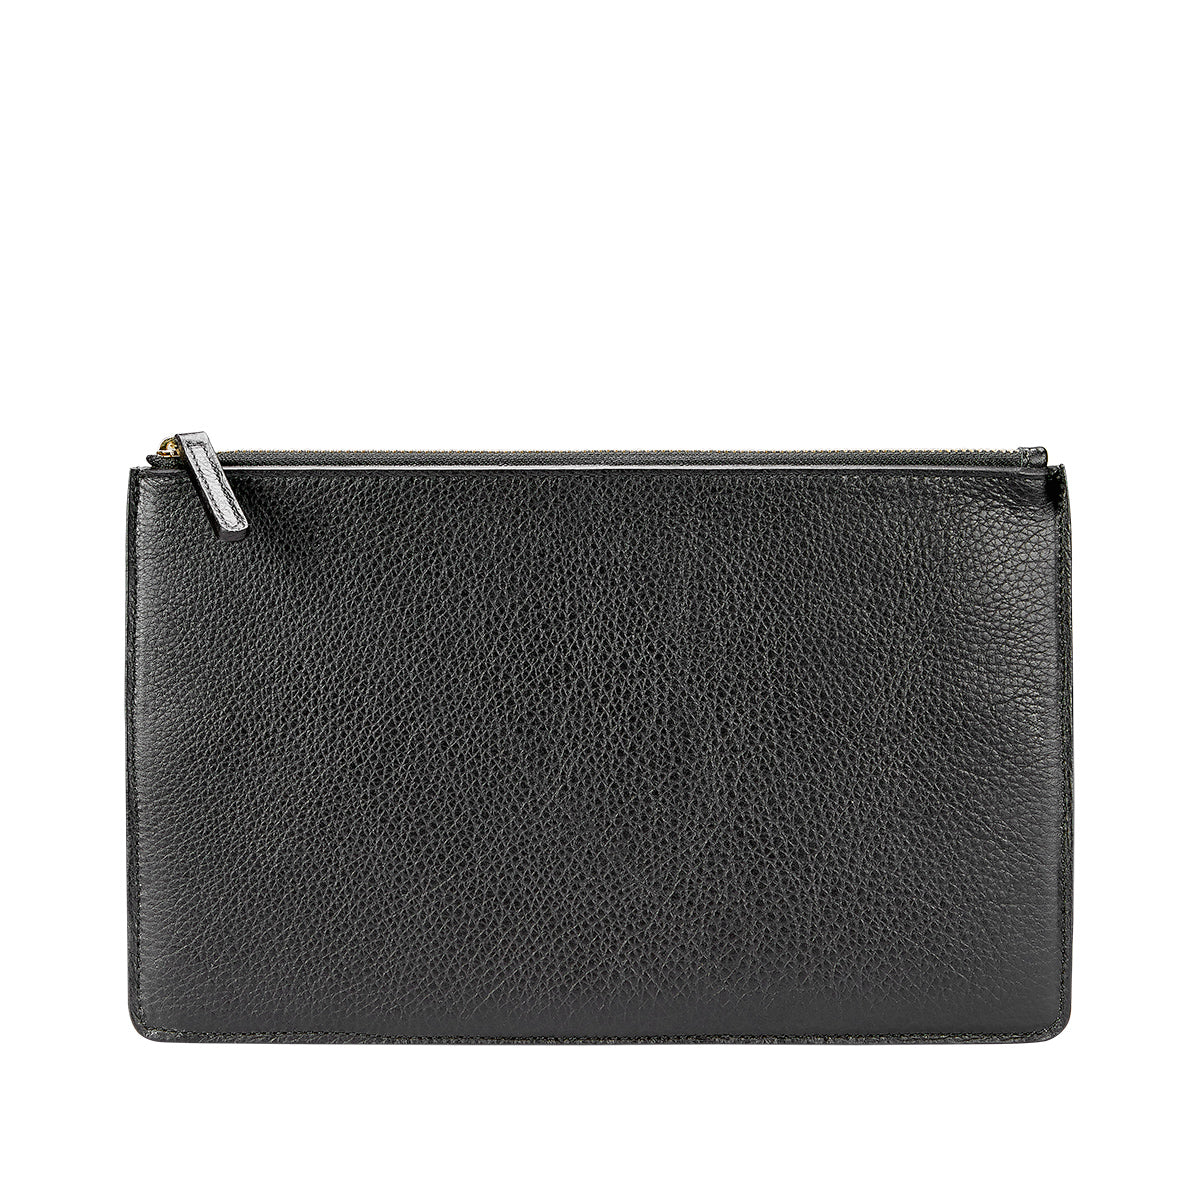 Graphic Image Signature Leather Pouch Black Goatskin Leather